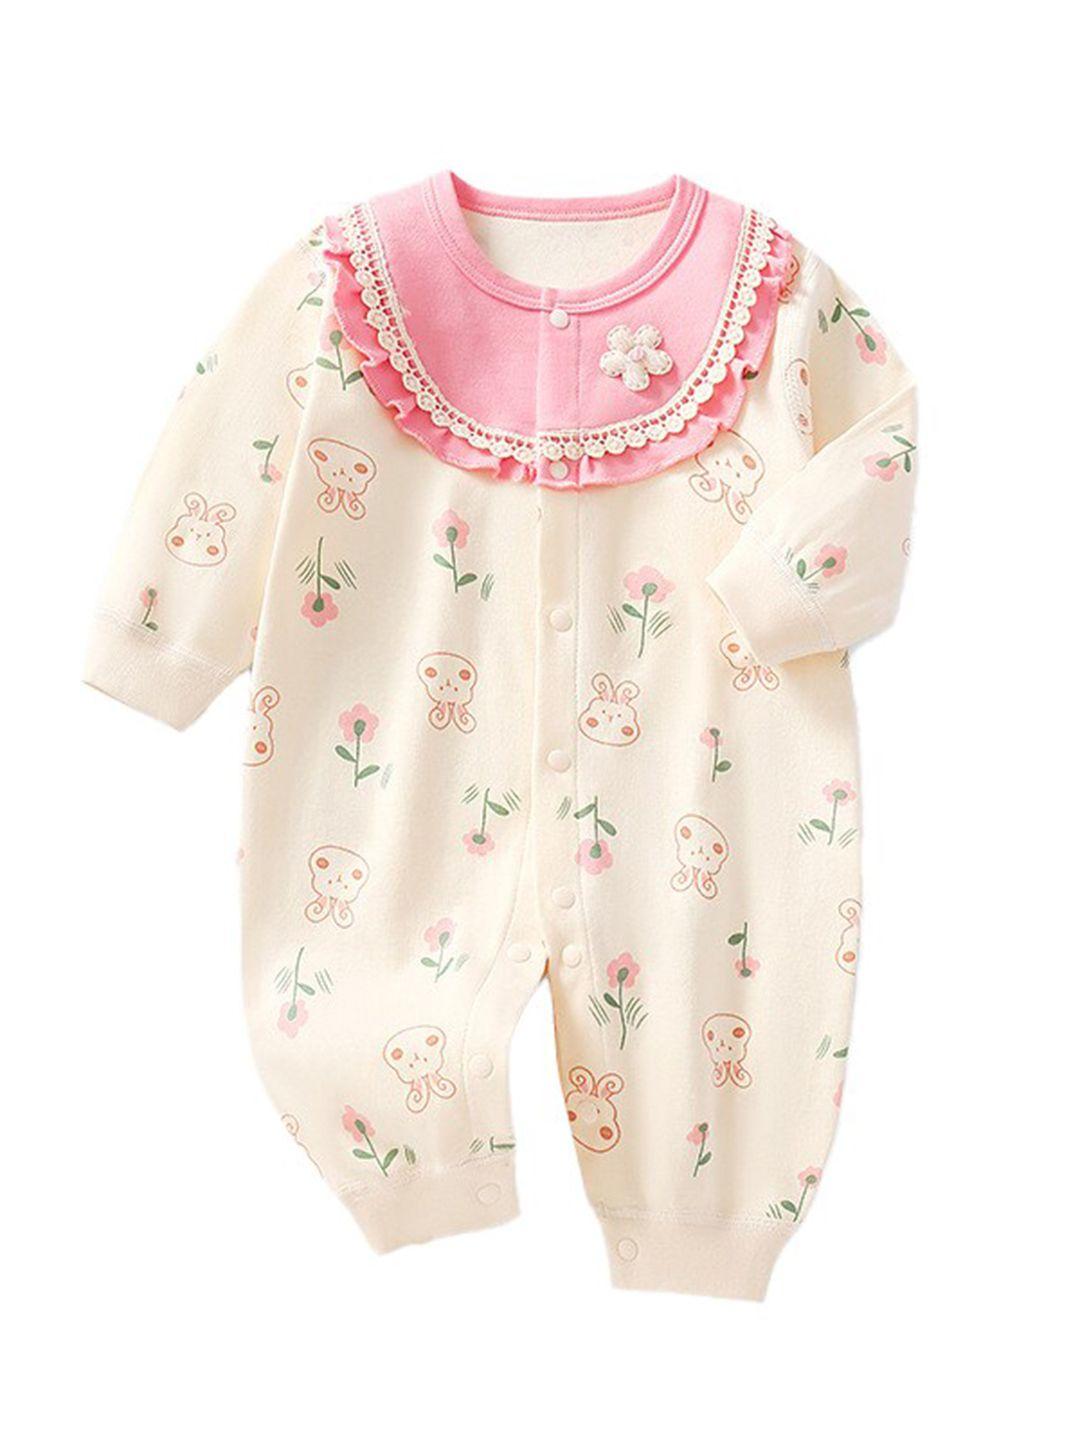 stylecast-infant-girls-pink-printed-cotton-rompers